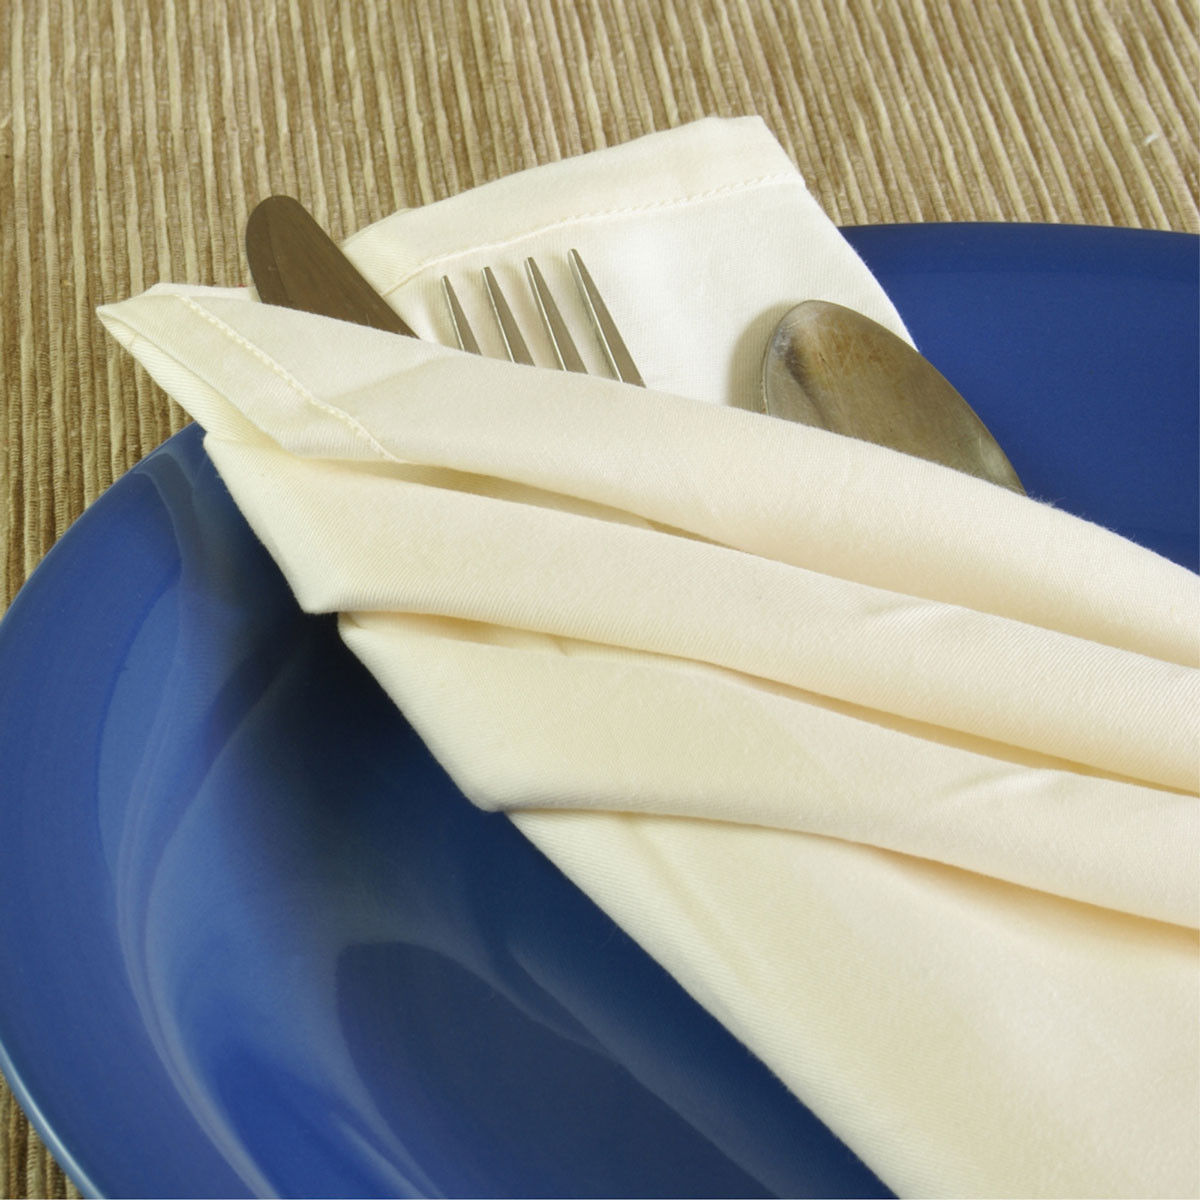 What spun polyester fabric wholesale is Pinnacle's superior Infinity Napkins made from?